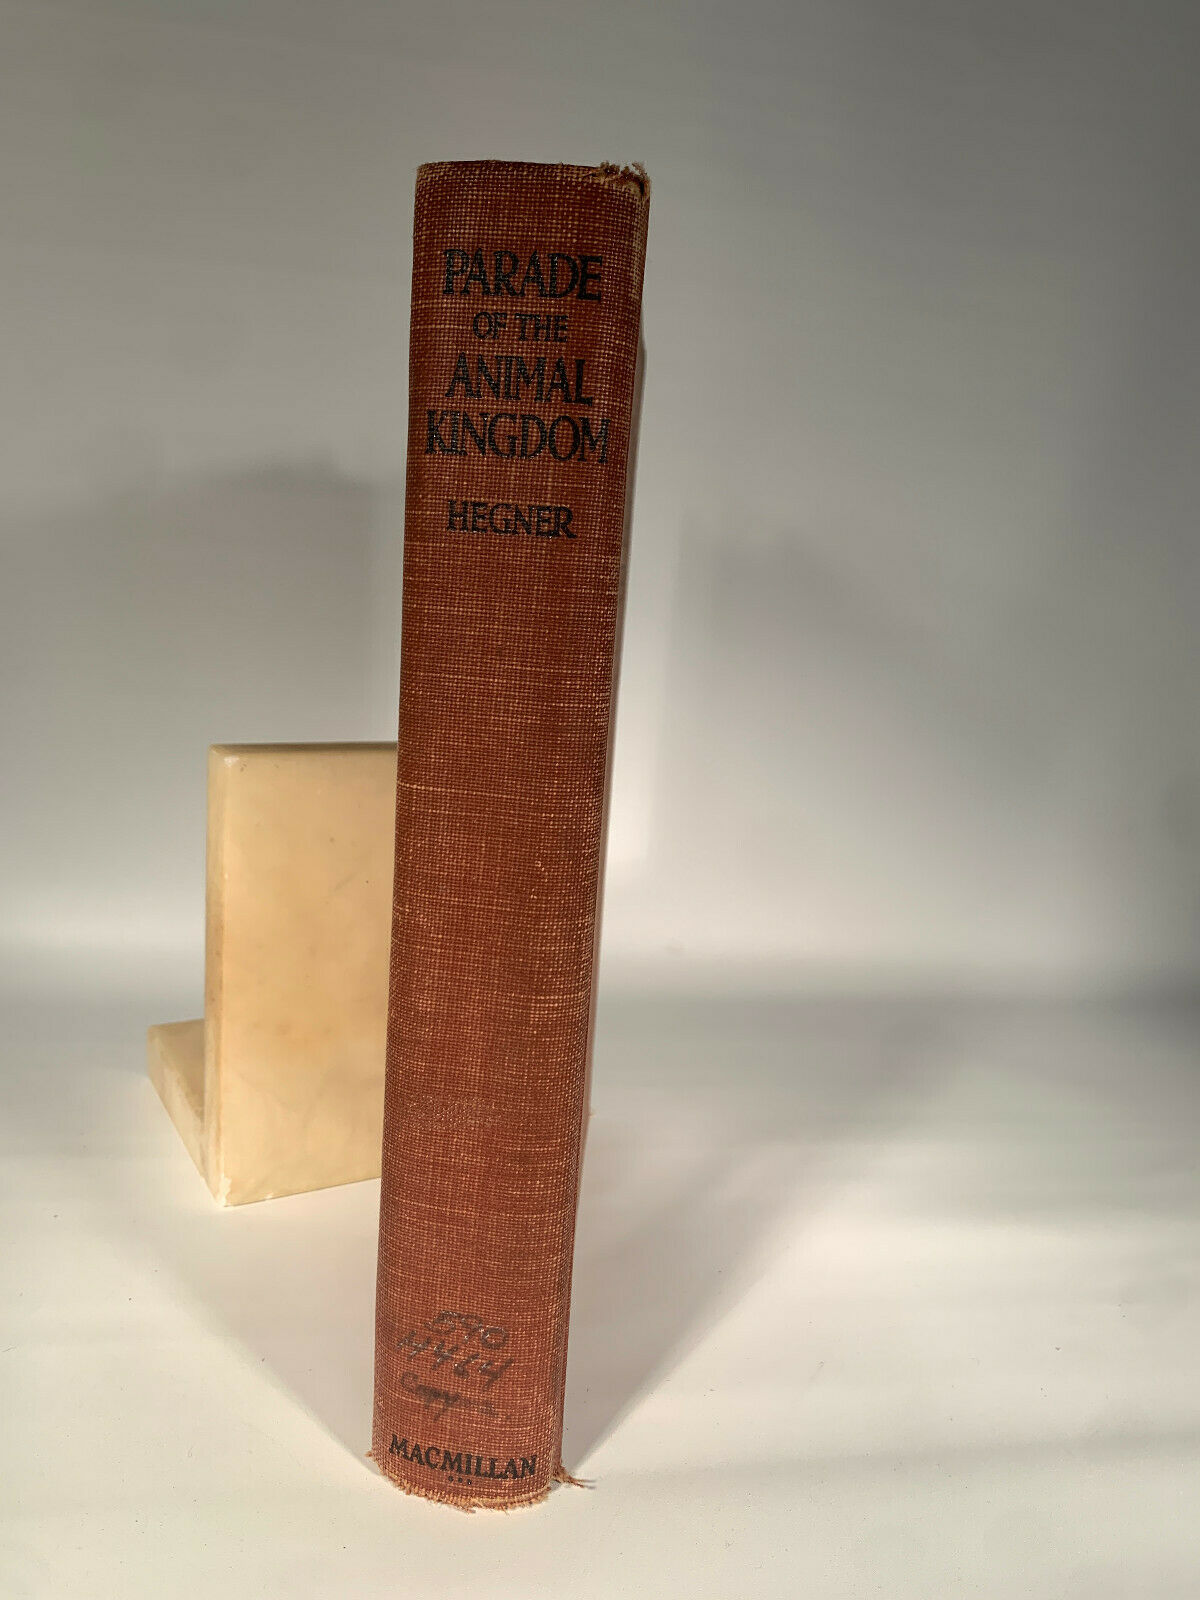 Parade of the Animal Kingdom by Robert Hegner Hardcover 1935